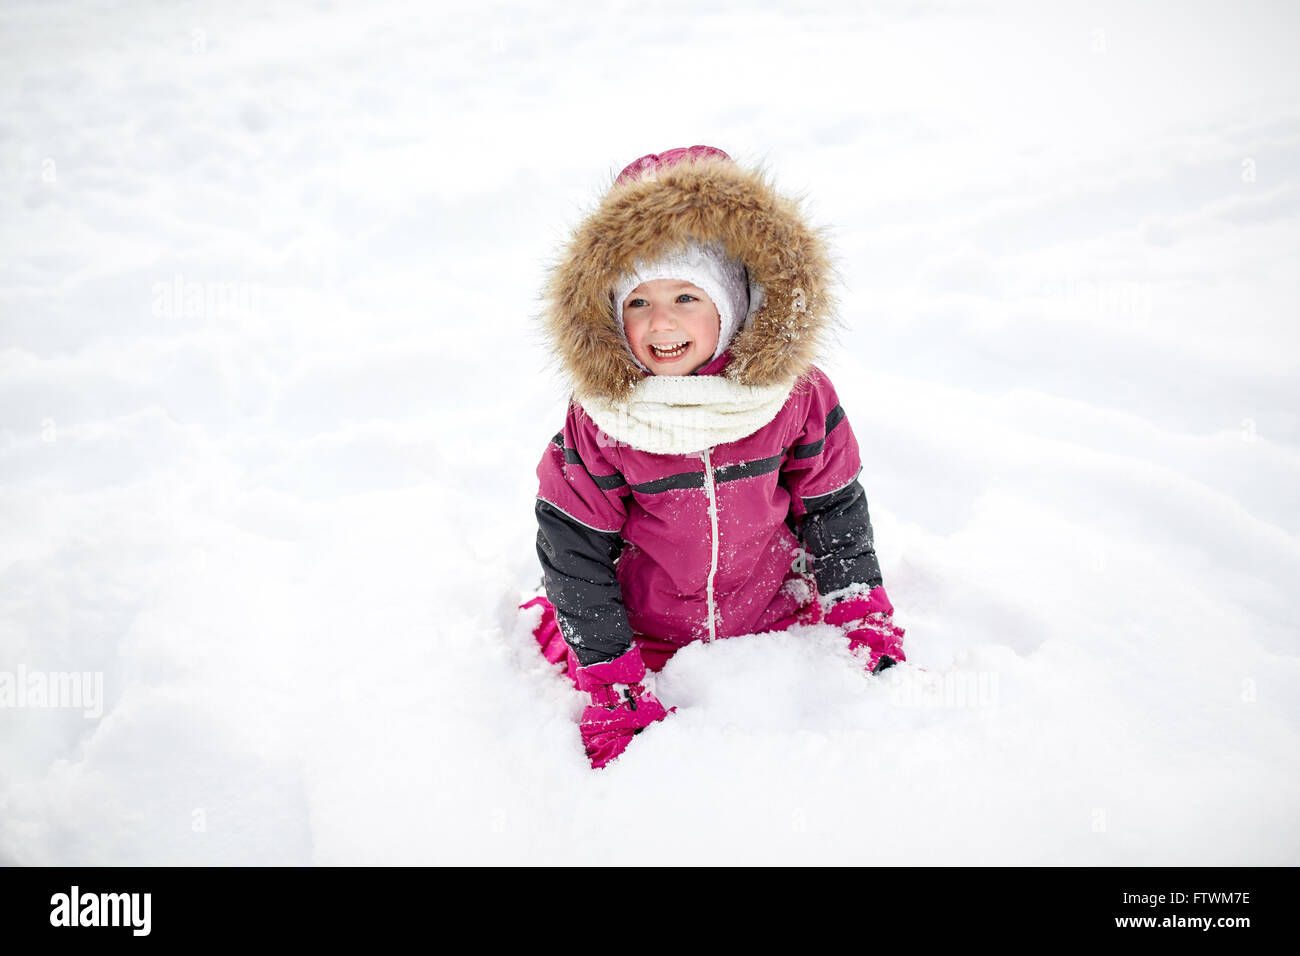 f happy little child or girl with snow in winter Stock Photo